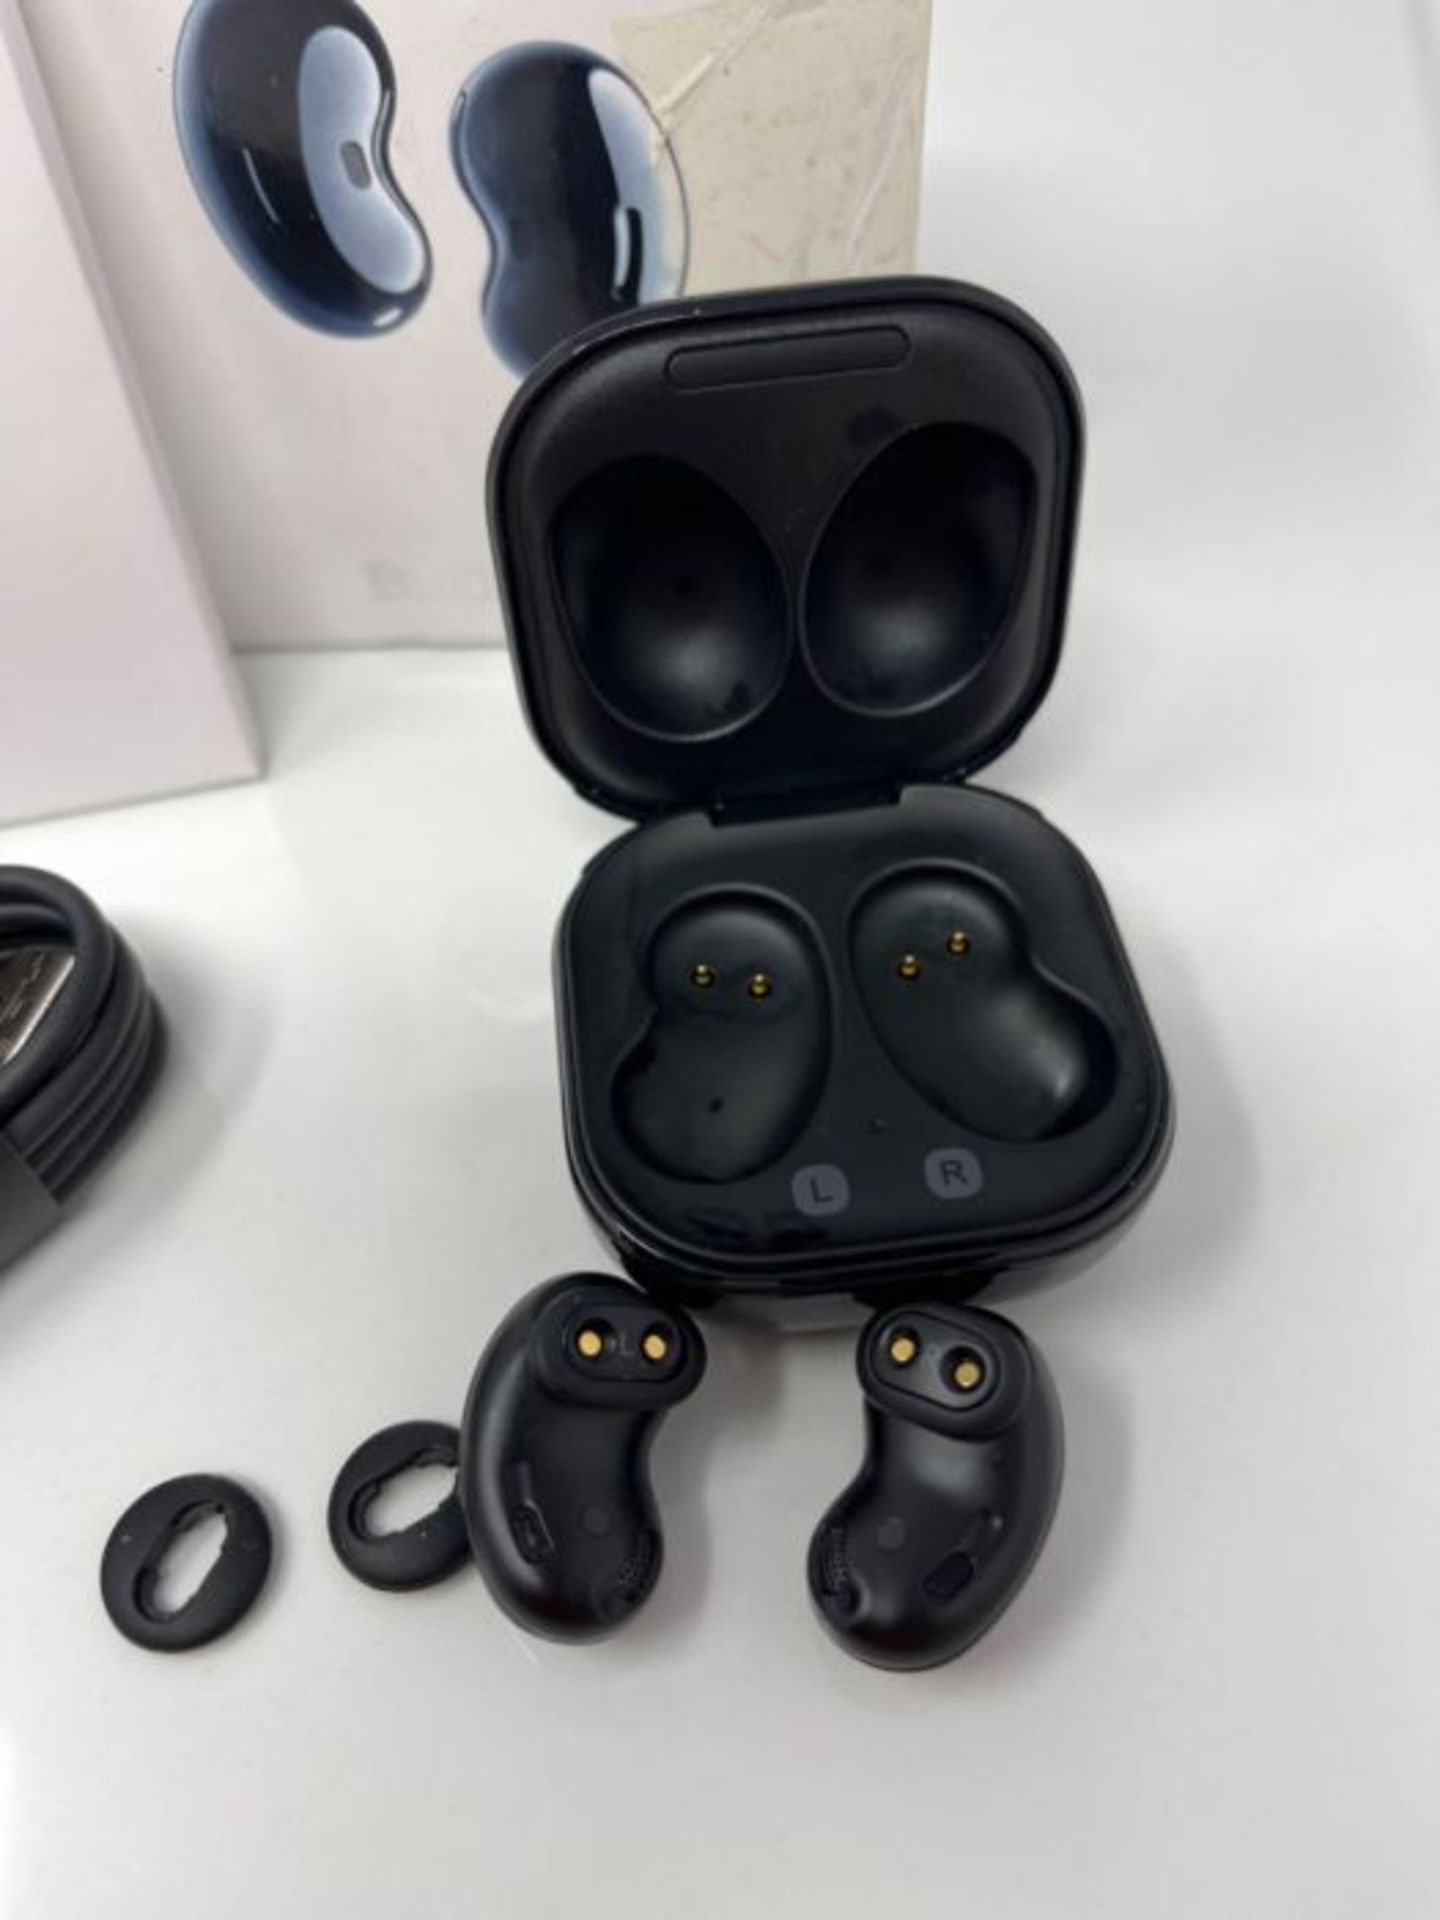 RRP £69.00 Samsung Galaxy Buds Live Wireless Earphones, 2 Year Manufacturer Warranty, Mystic Blac - Image 3 of 3